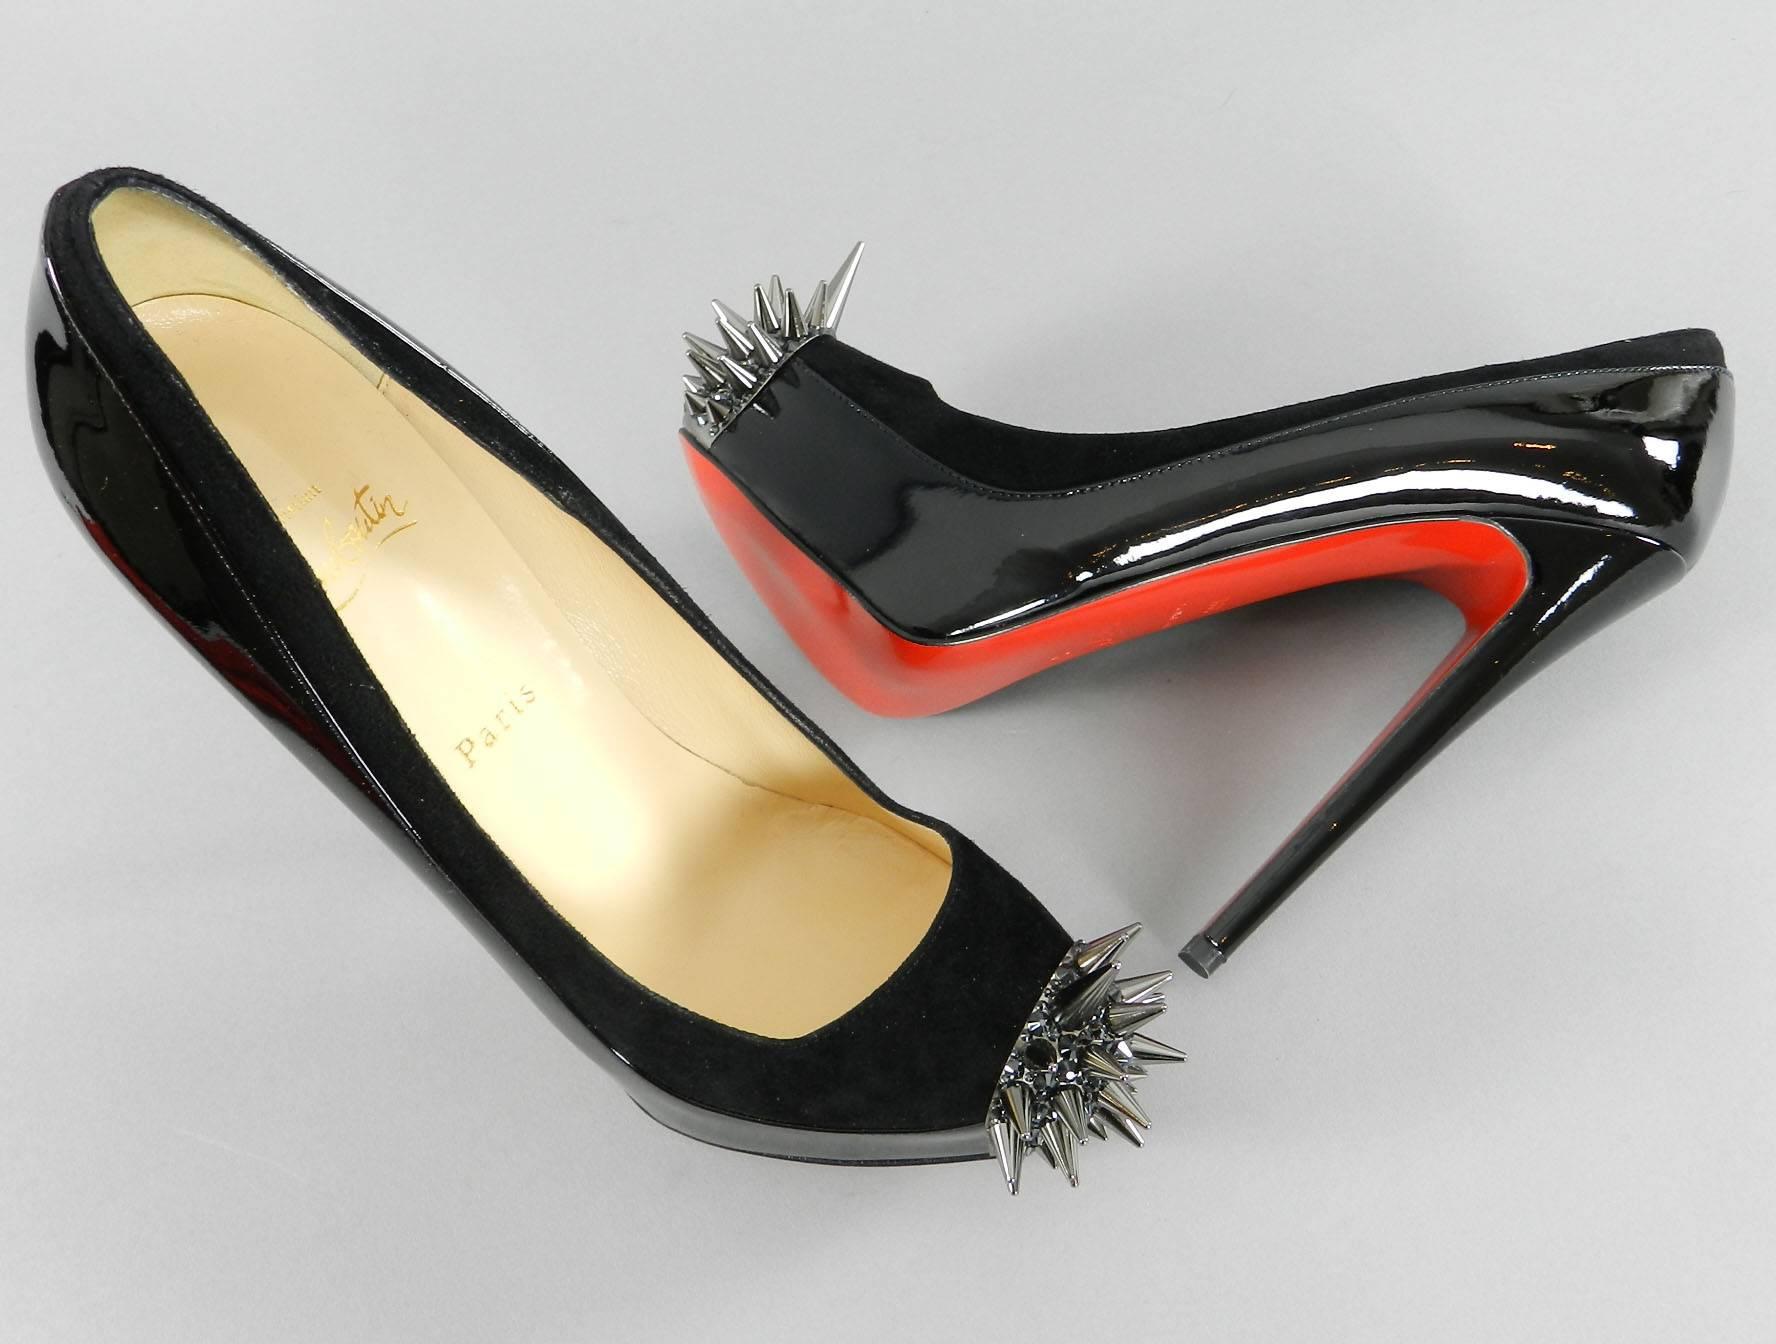 Christian Louboutin Asteroid pump. Size 39.5. 150mm heel. Unworn.  Comes with dusters and extra replacement lifts.

Shipping prices provided are for tracked Ground shipping to the US. Yes we ship to International, Canada, and can also quote for